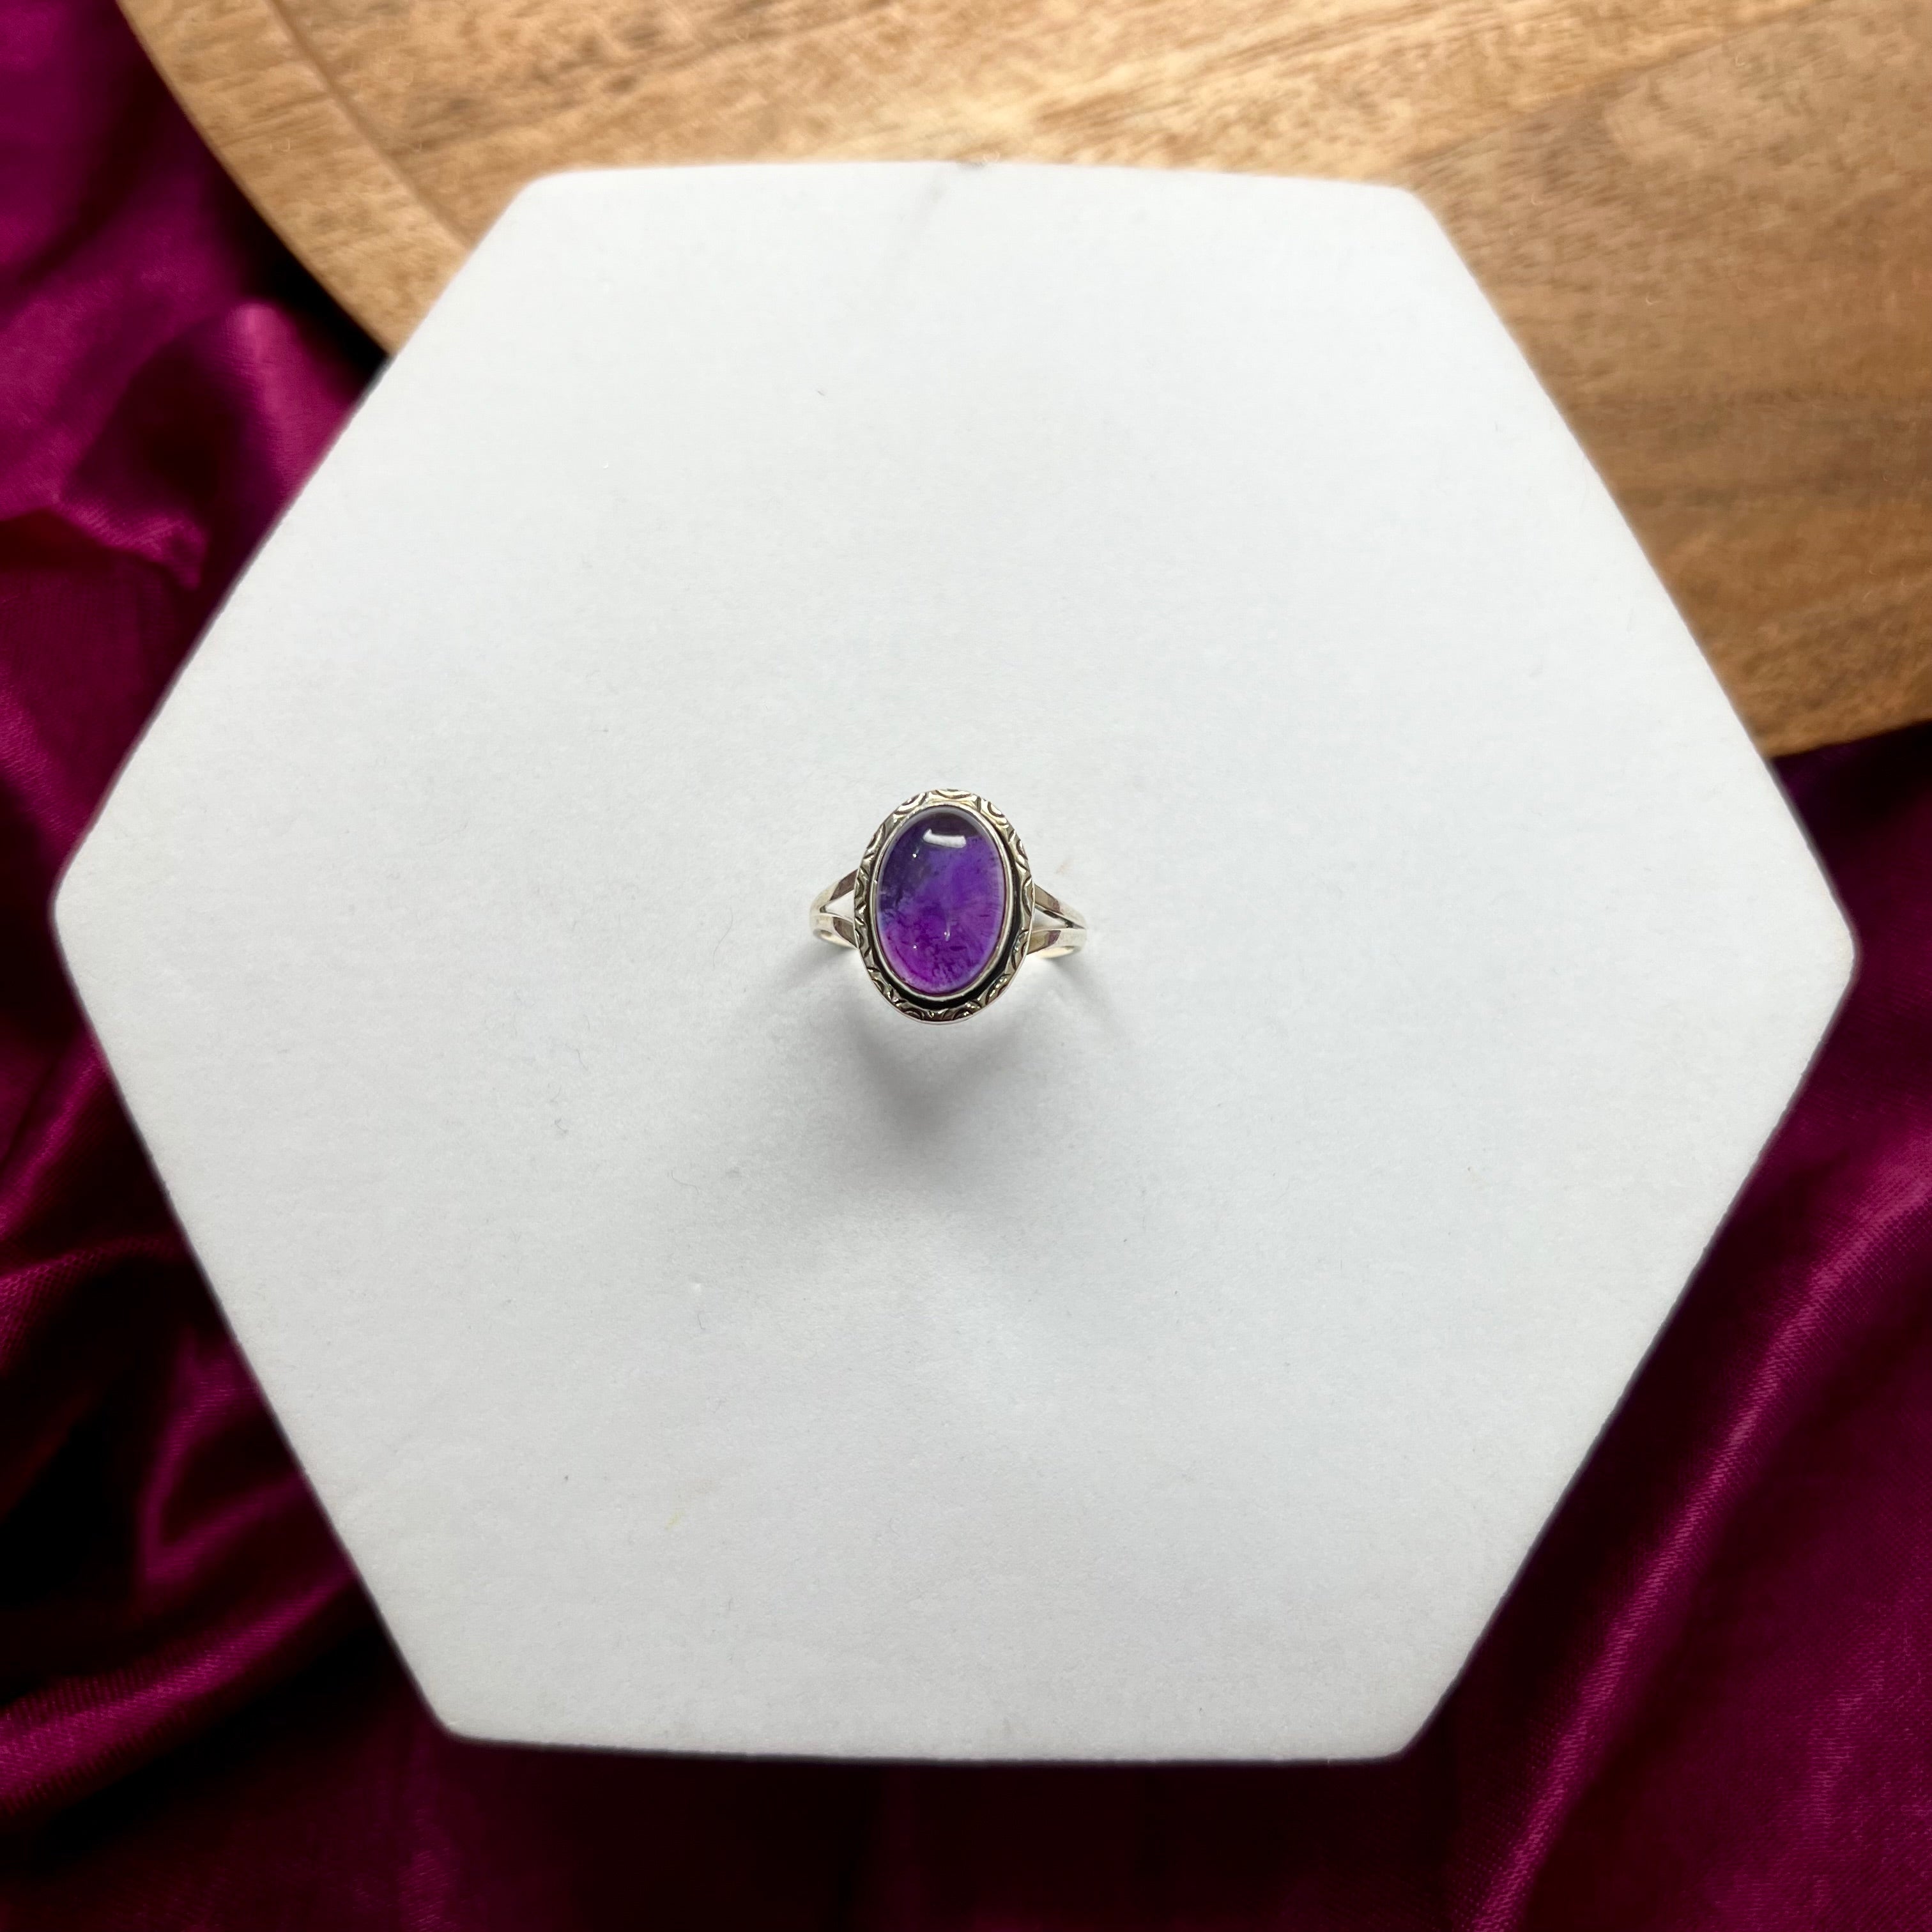 HANDCRAFTED AMETHYST RING-SILVER 925